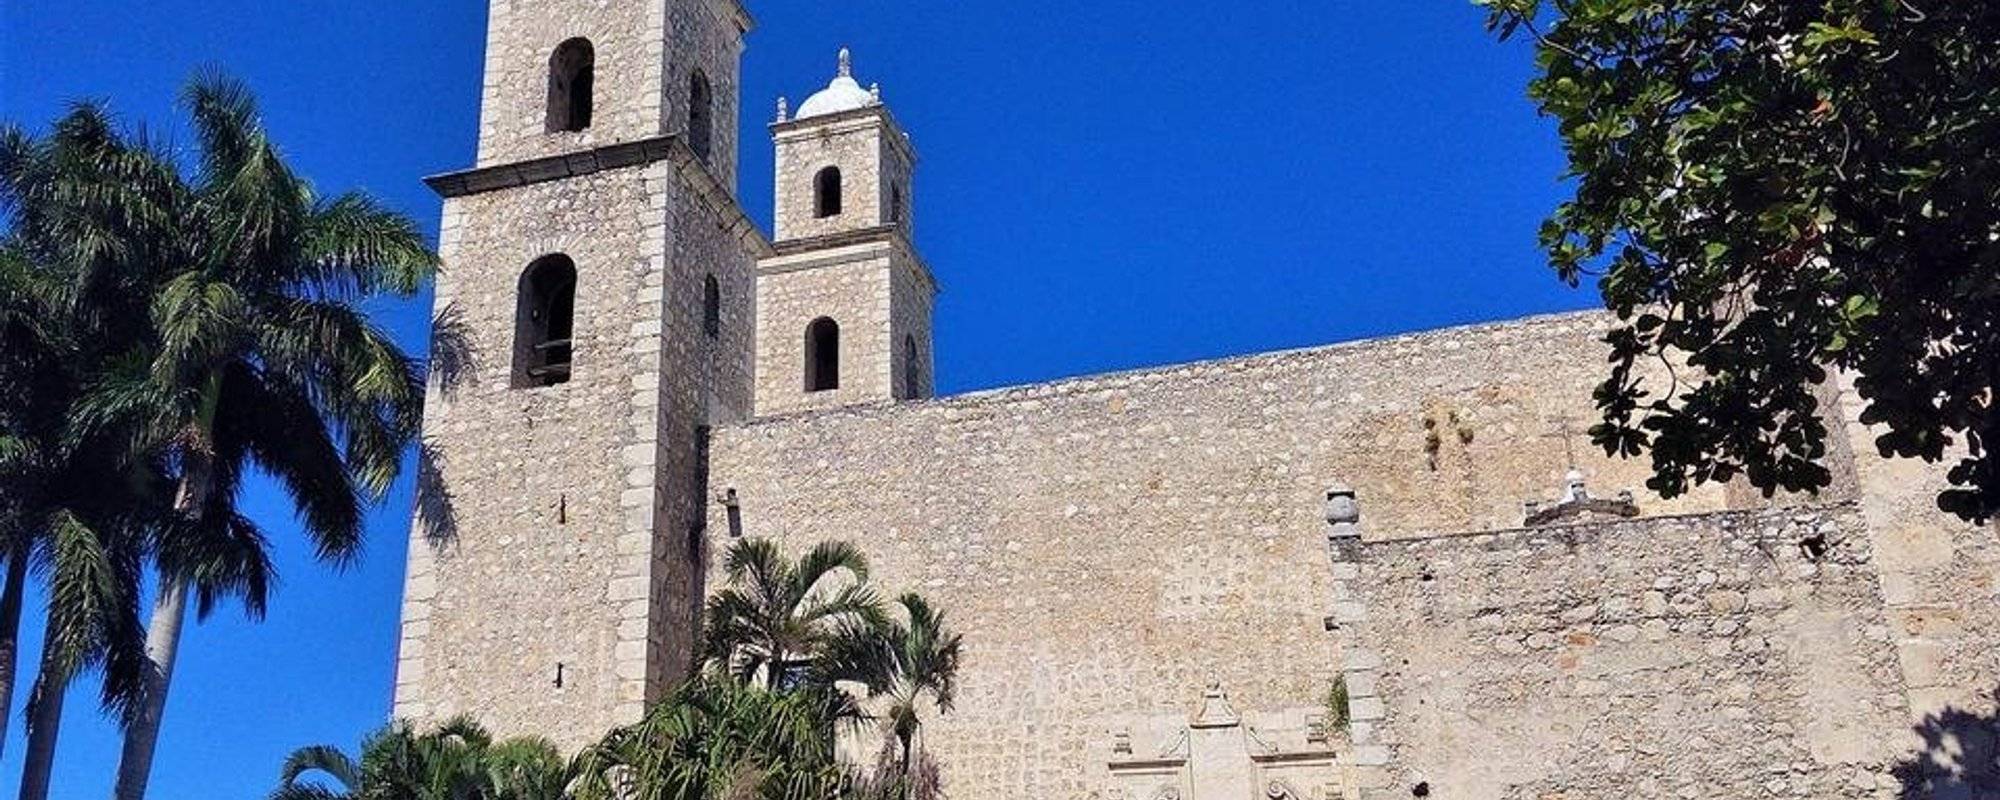 Beauties of Yucatan: picturesque churches of Merida and Campeche City